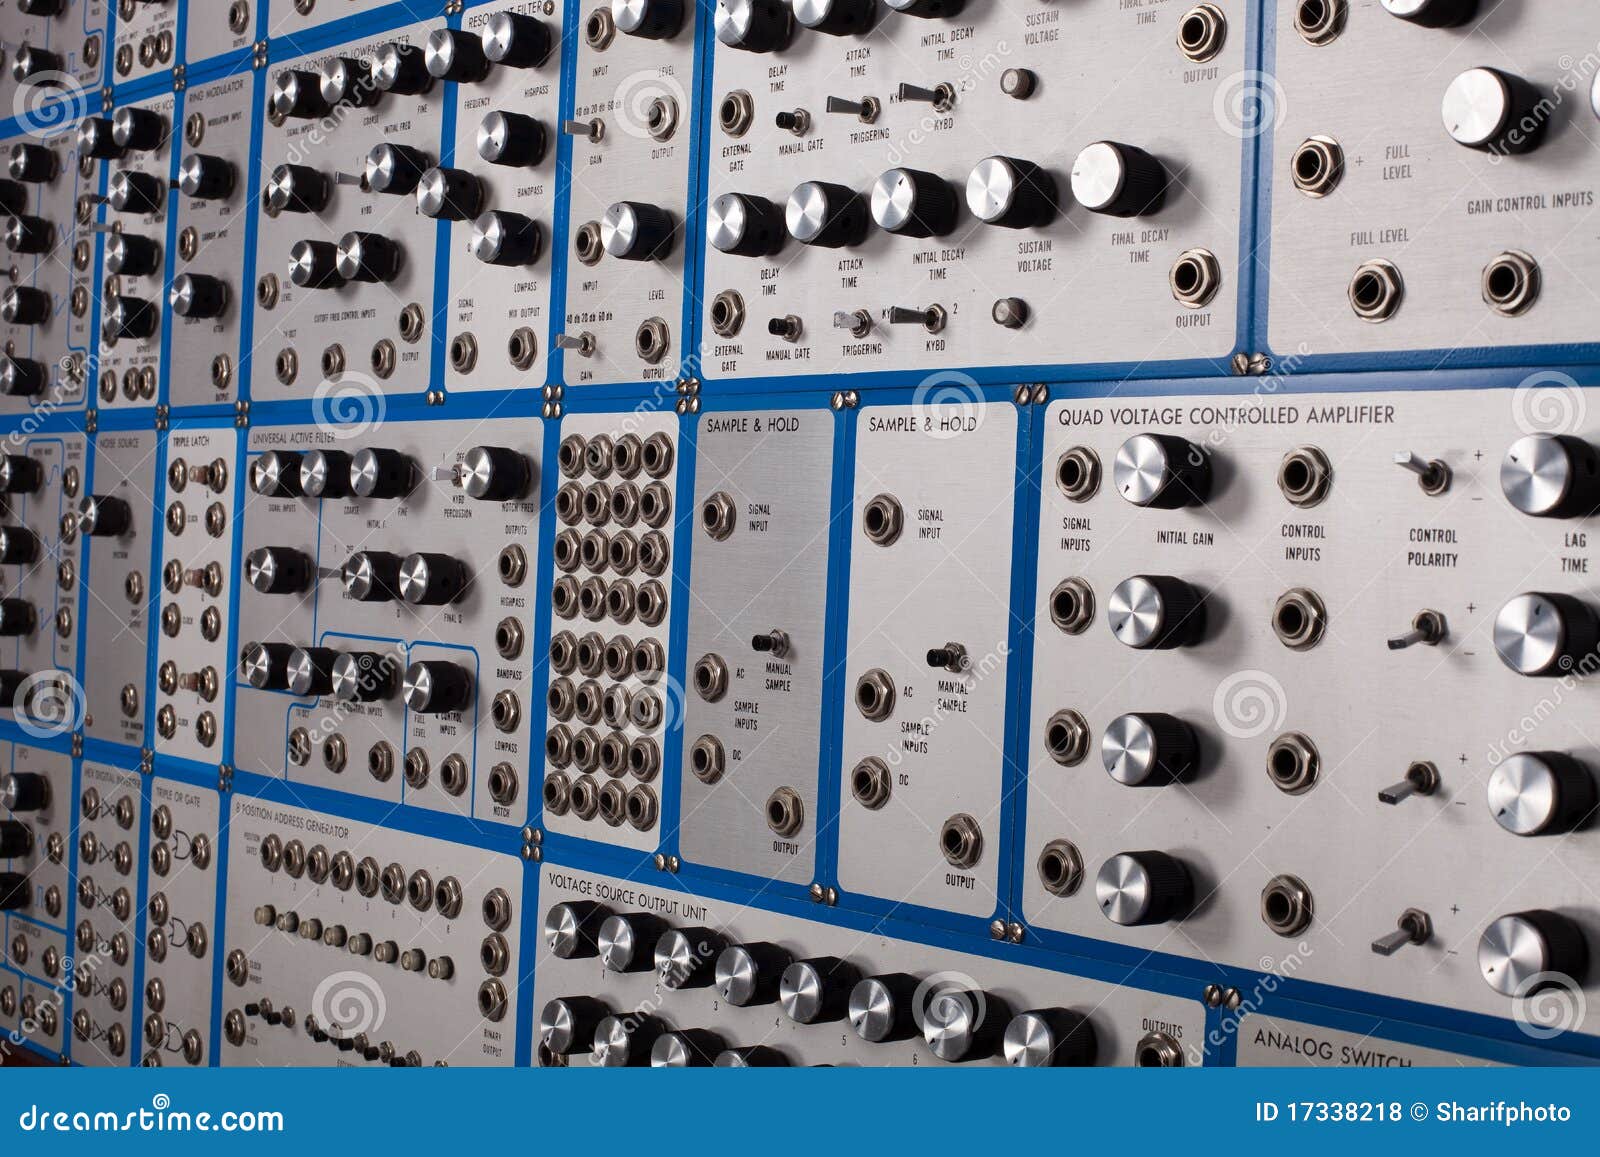 side view of vintage analog modular synthesizer